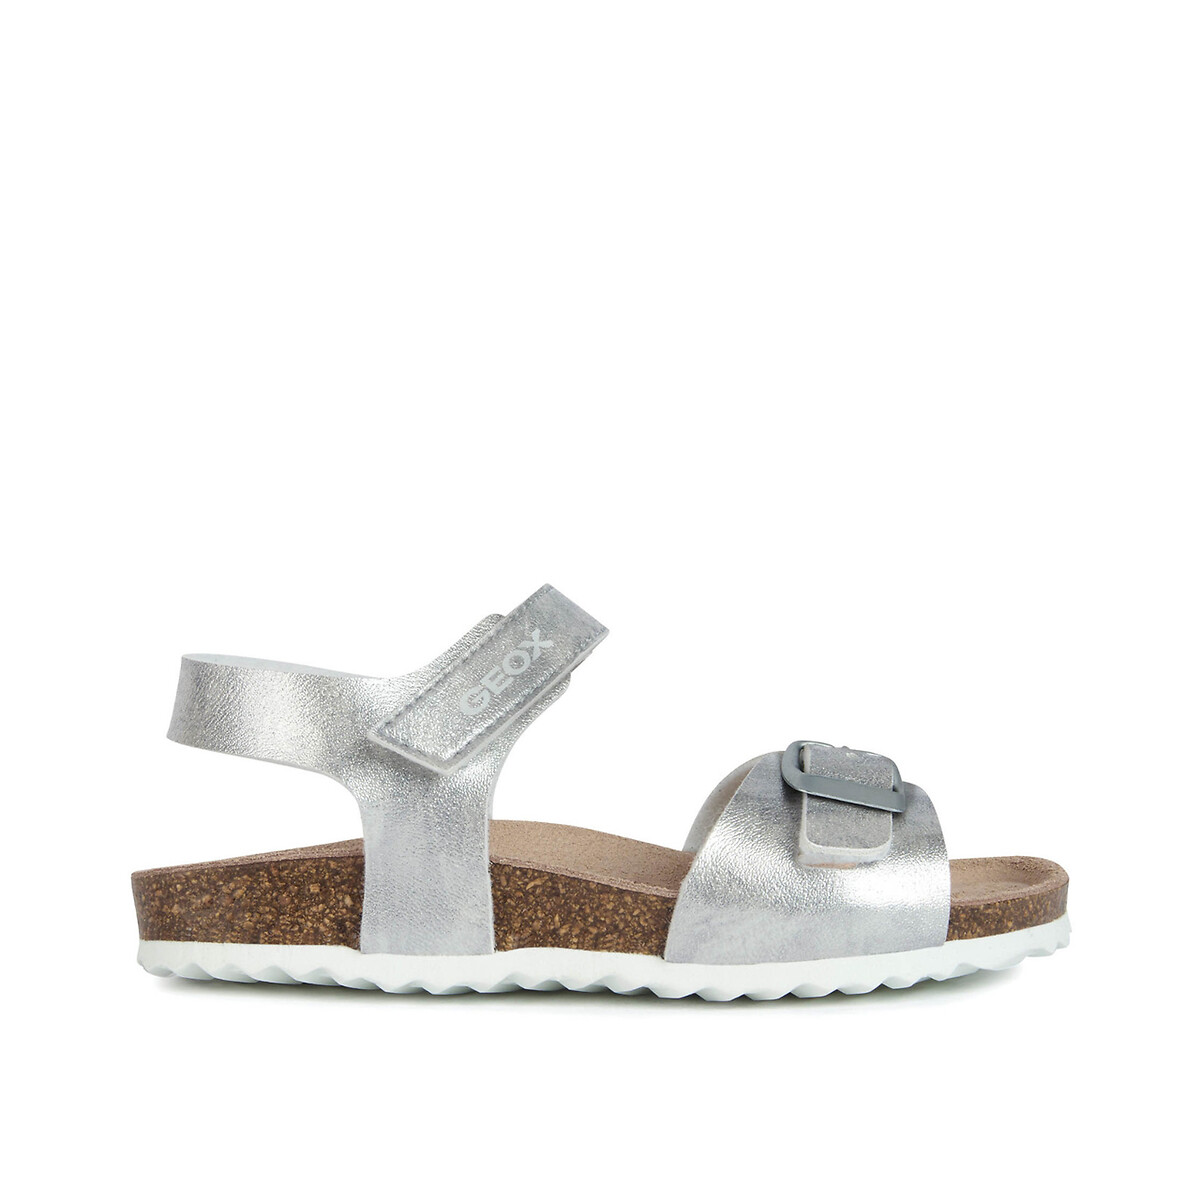 kids adriel breathable sandals with touch 'n' close fastening